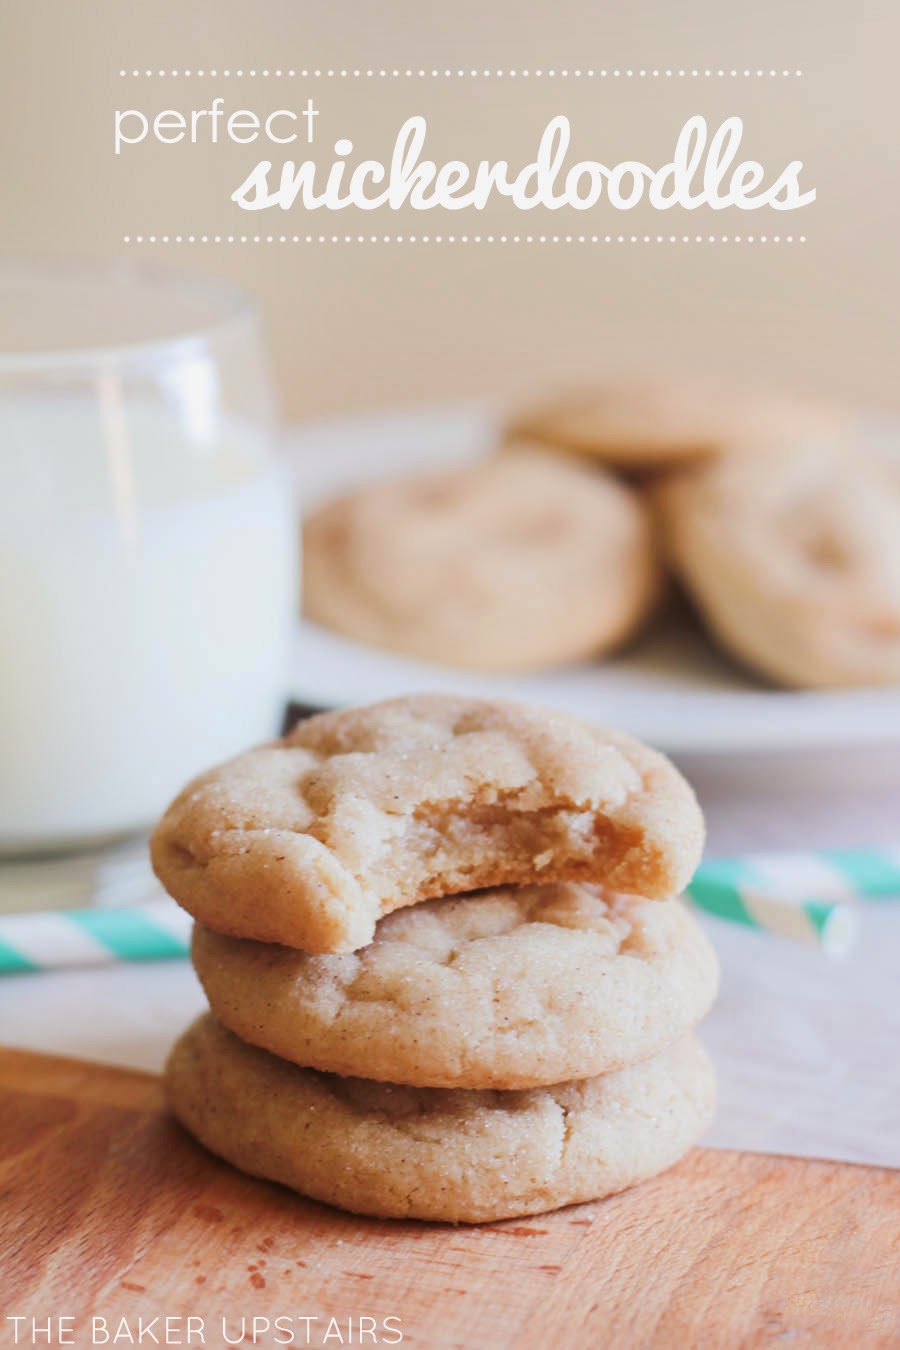 These snickerdoodle cookies are absolute perfection! They're buttery and chewy and soft and delicious - everything you could want in a cookie!